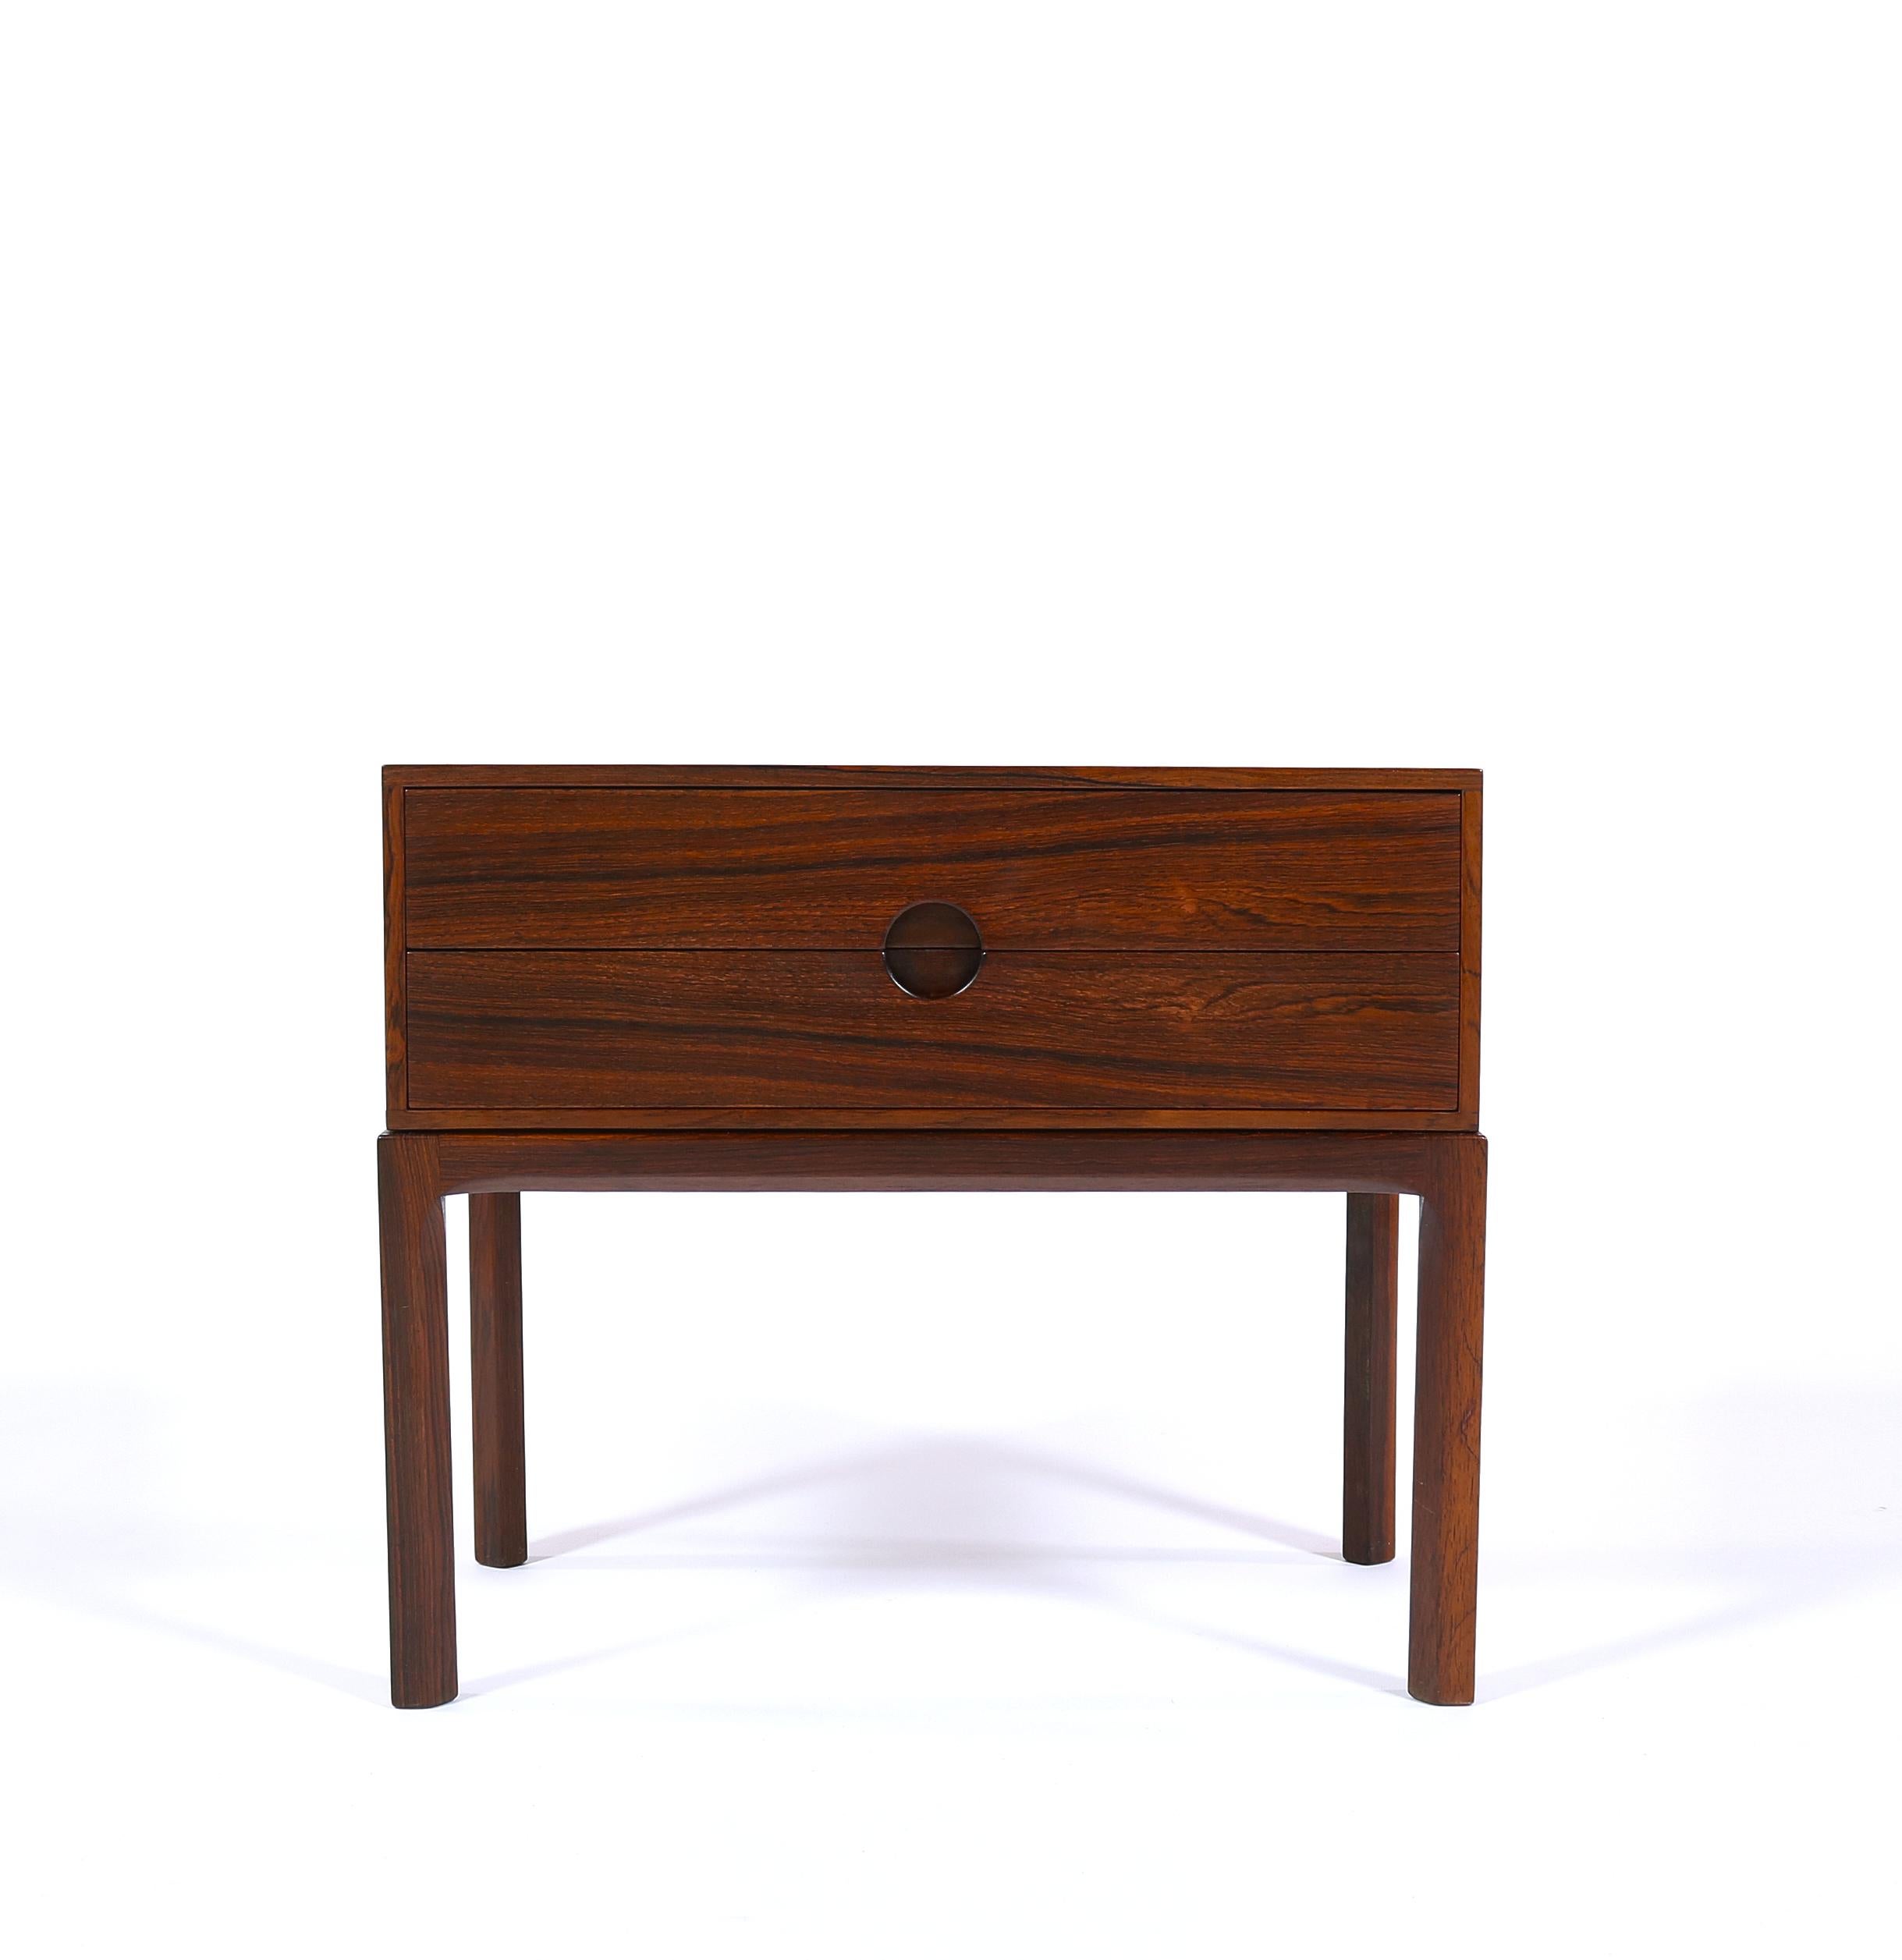 Kai Kristiansen cabinet made circa 1960. Produced by cabinetmaker Aksel Kjaersgaard in Odder, Denmark. The cabinet has 2 drawers with Kristiansen's trademark circular drawer pull to the center. Great condition with very few signs of wear.